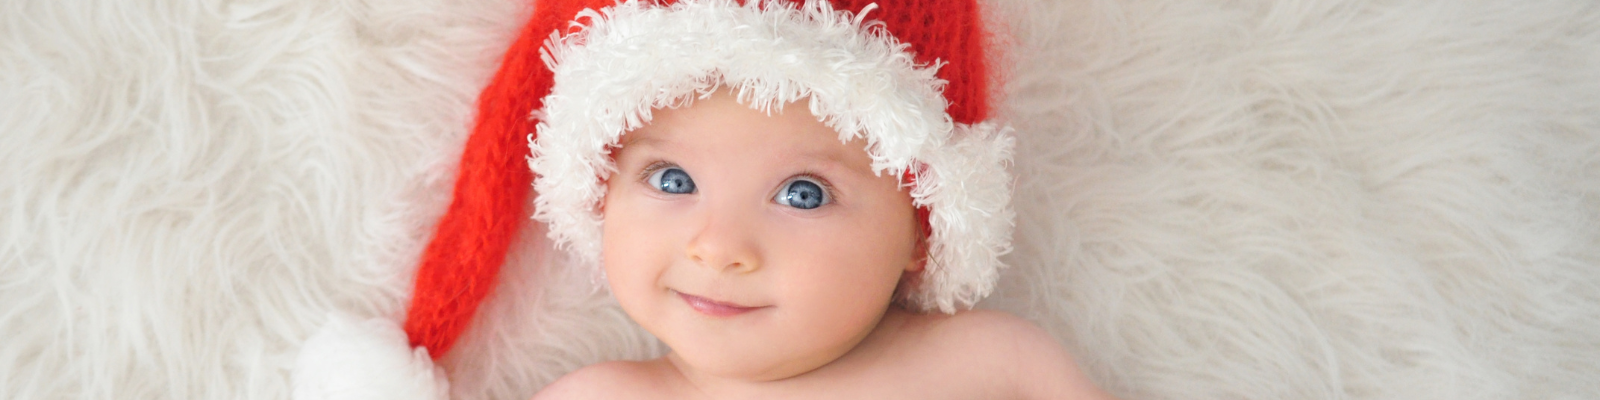 Totally Doable Baby Christmas Photography